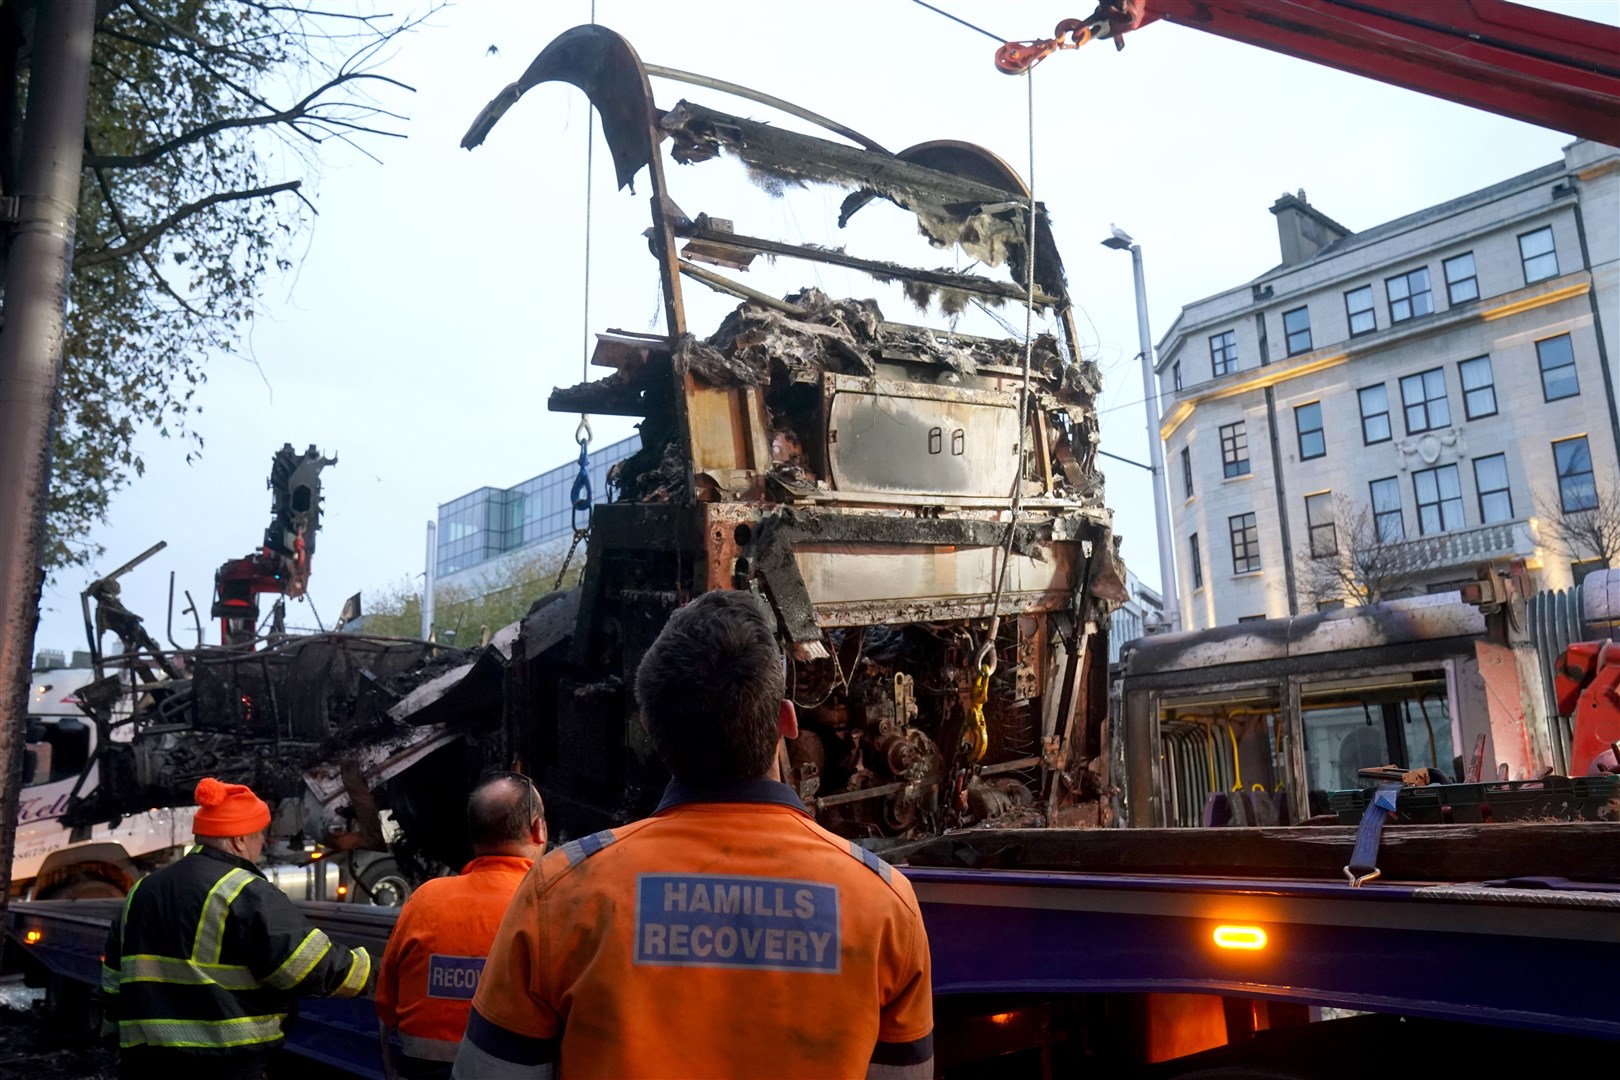 A burned out bus is removed from O’Connell Street in Dublin, in the aftermath of violent scenes in the city centre (Brian Lawless/PA)